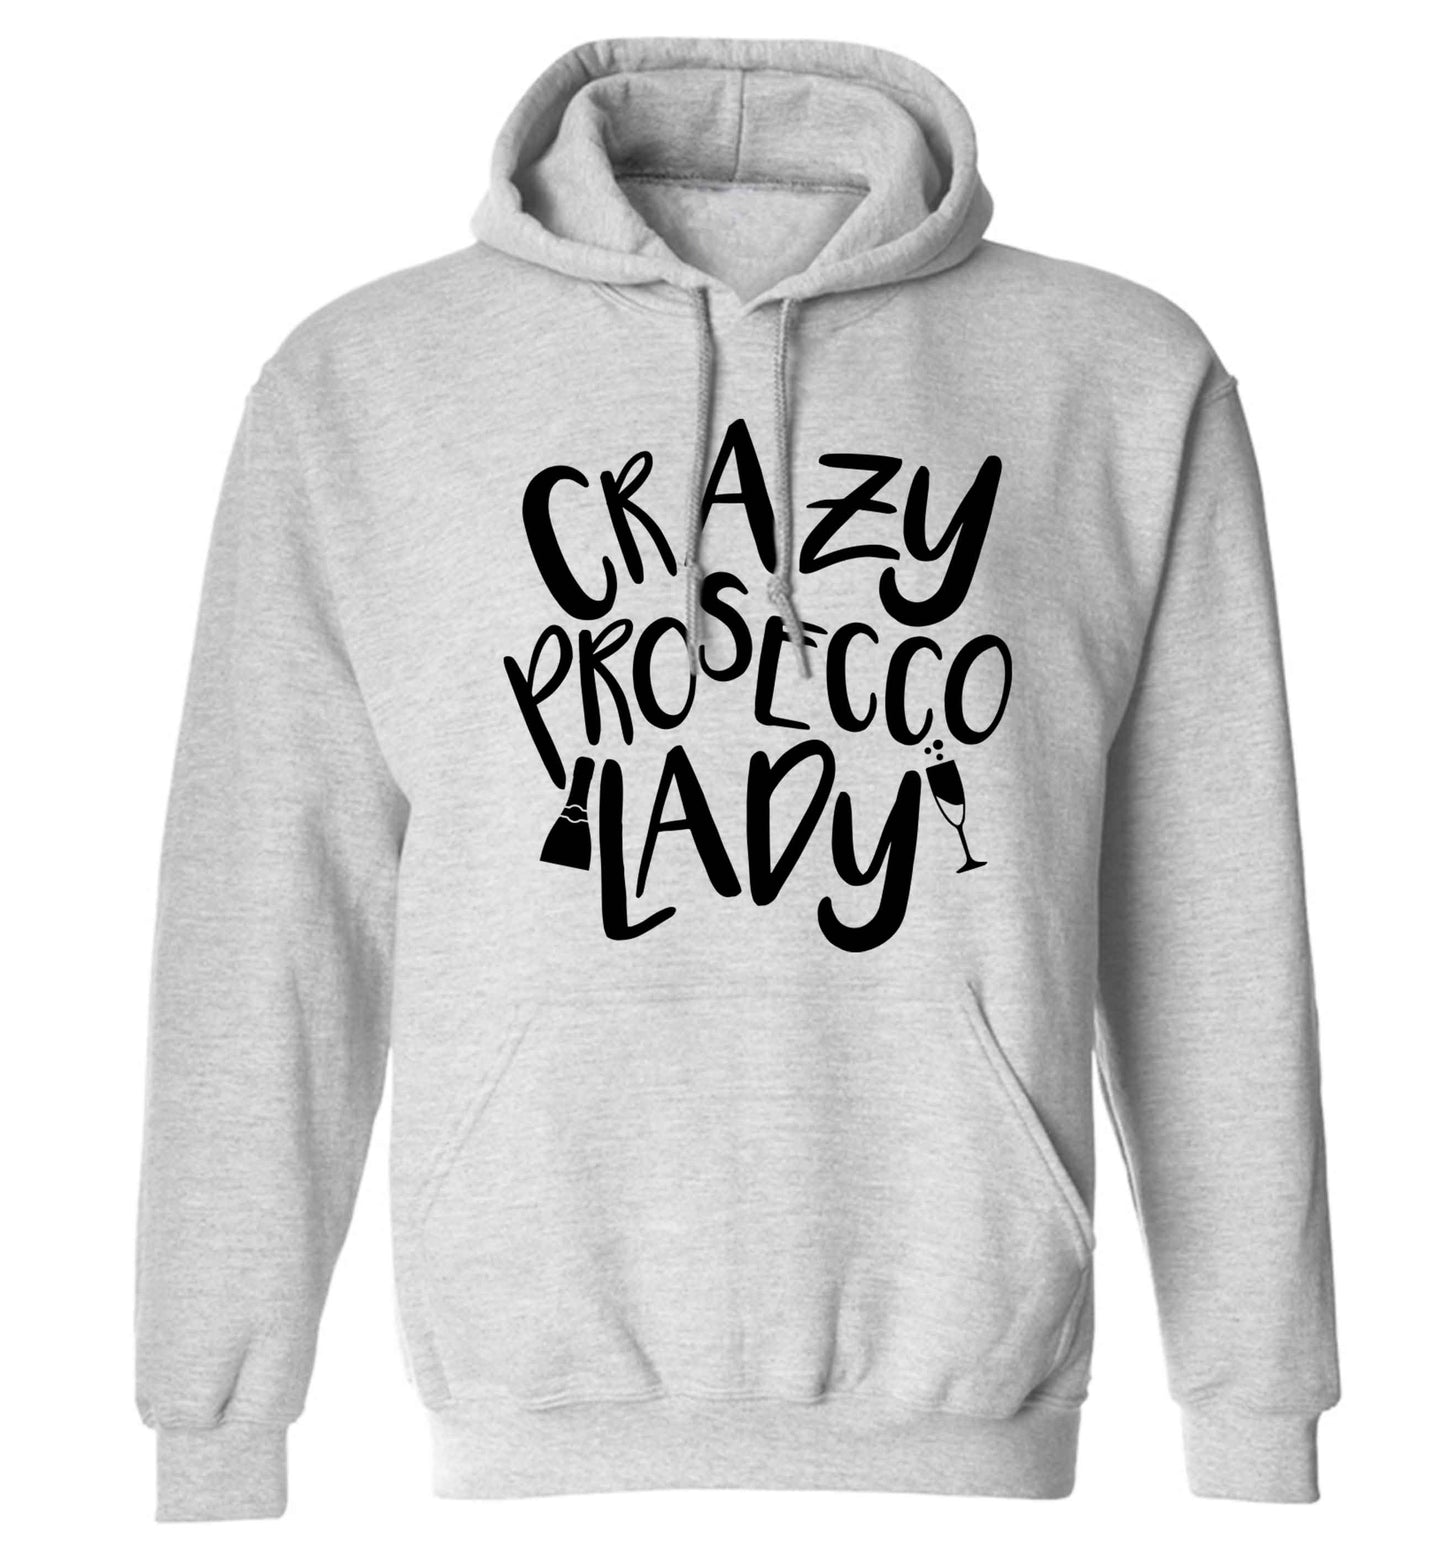 Crazy prosecco lady adults unisex grey hoodie 2XL